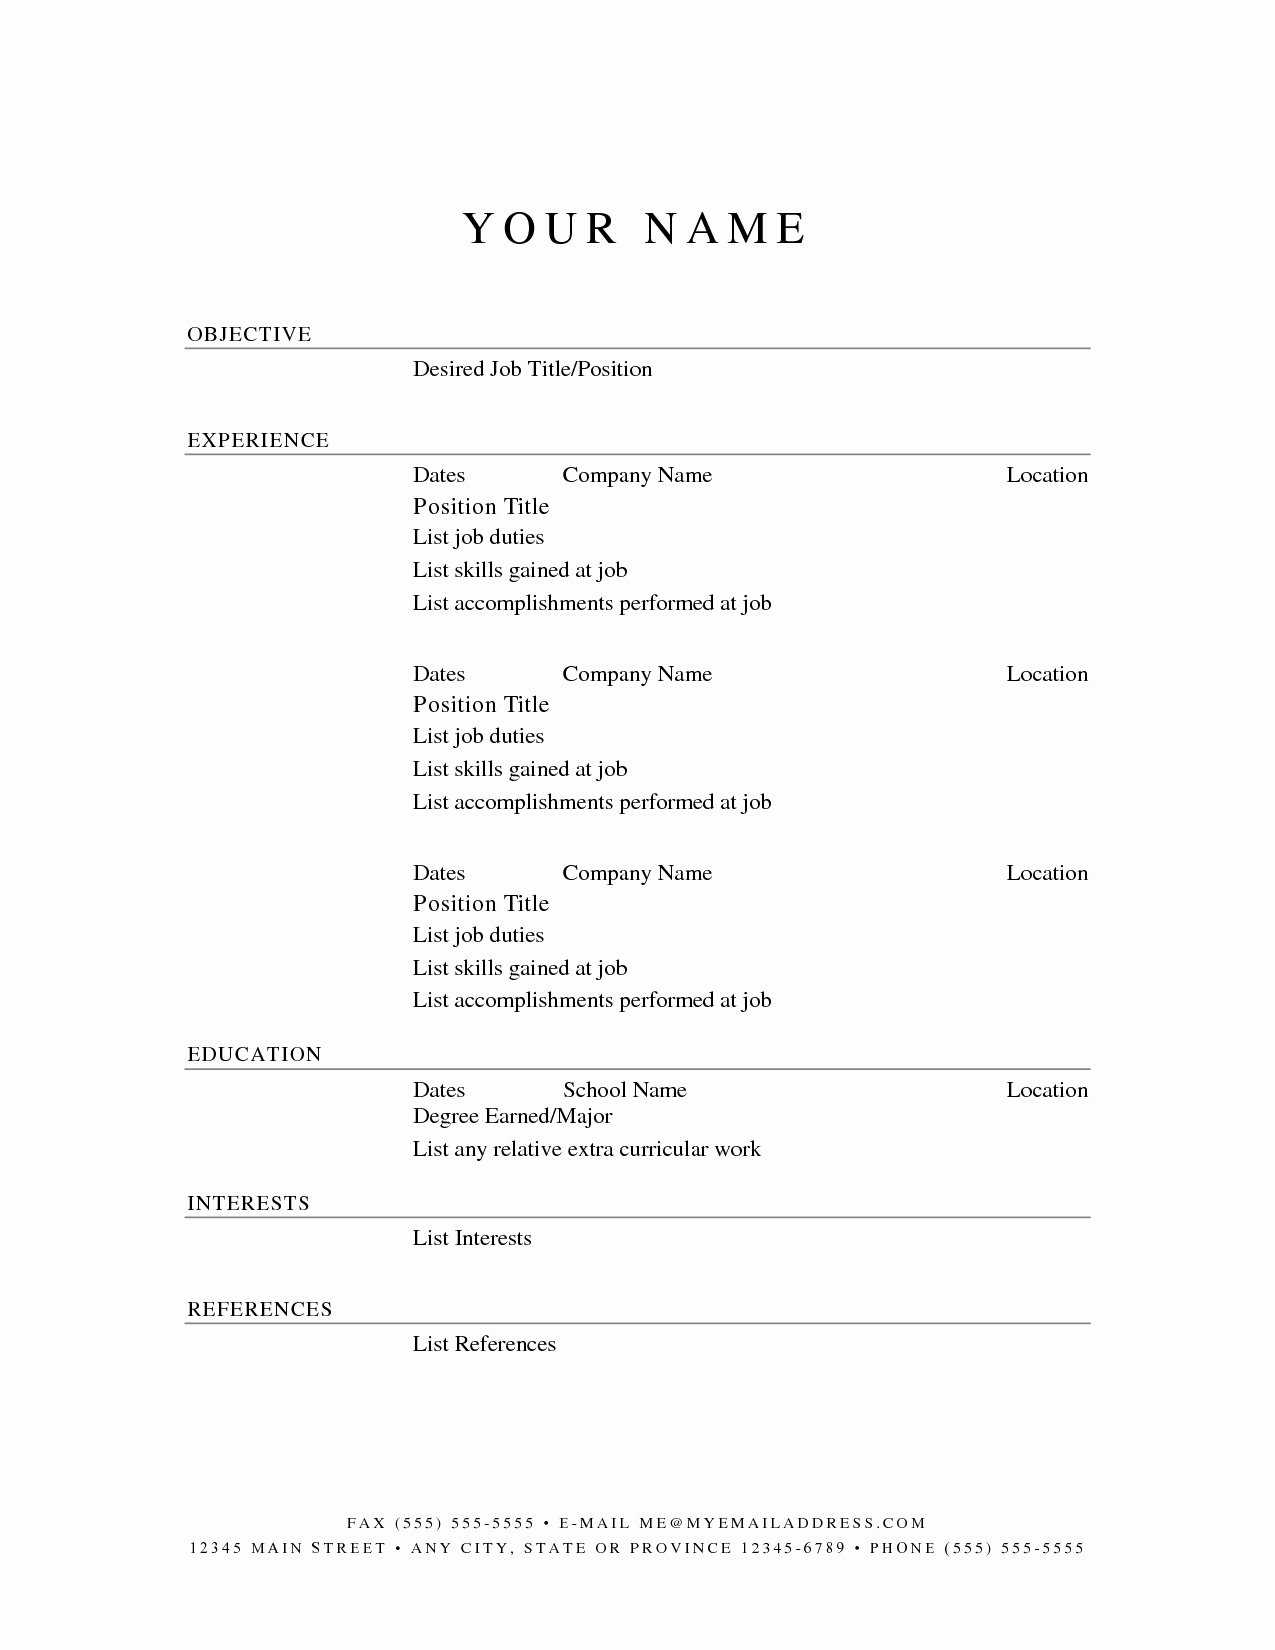 Free Printable Fill In The Blank Resume Templates Then Printable - Free Printable Fill In The Blank Resume Templates